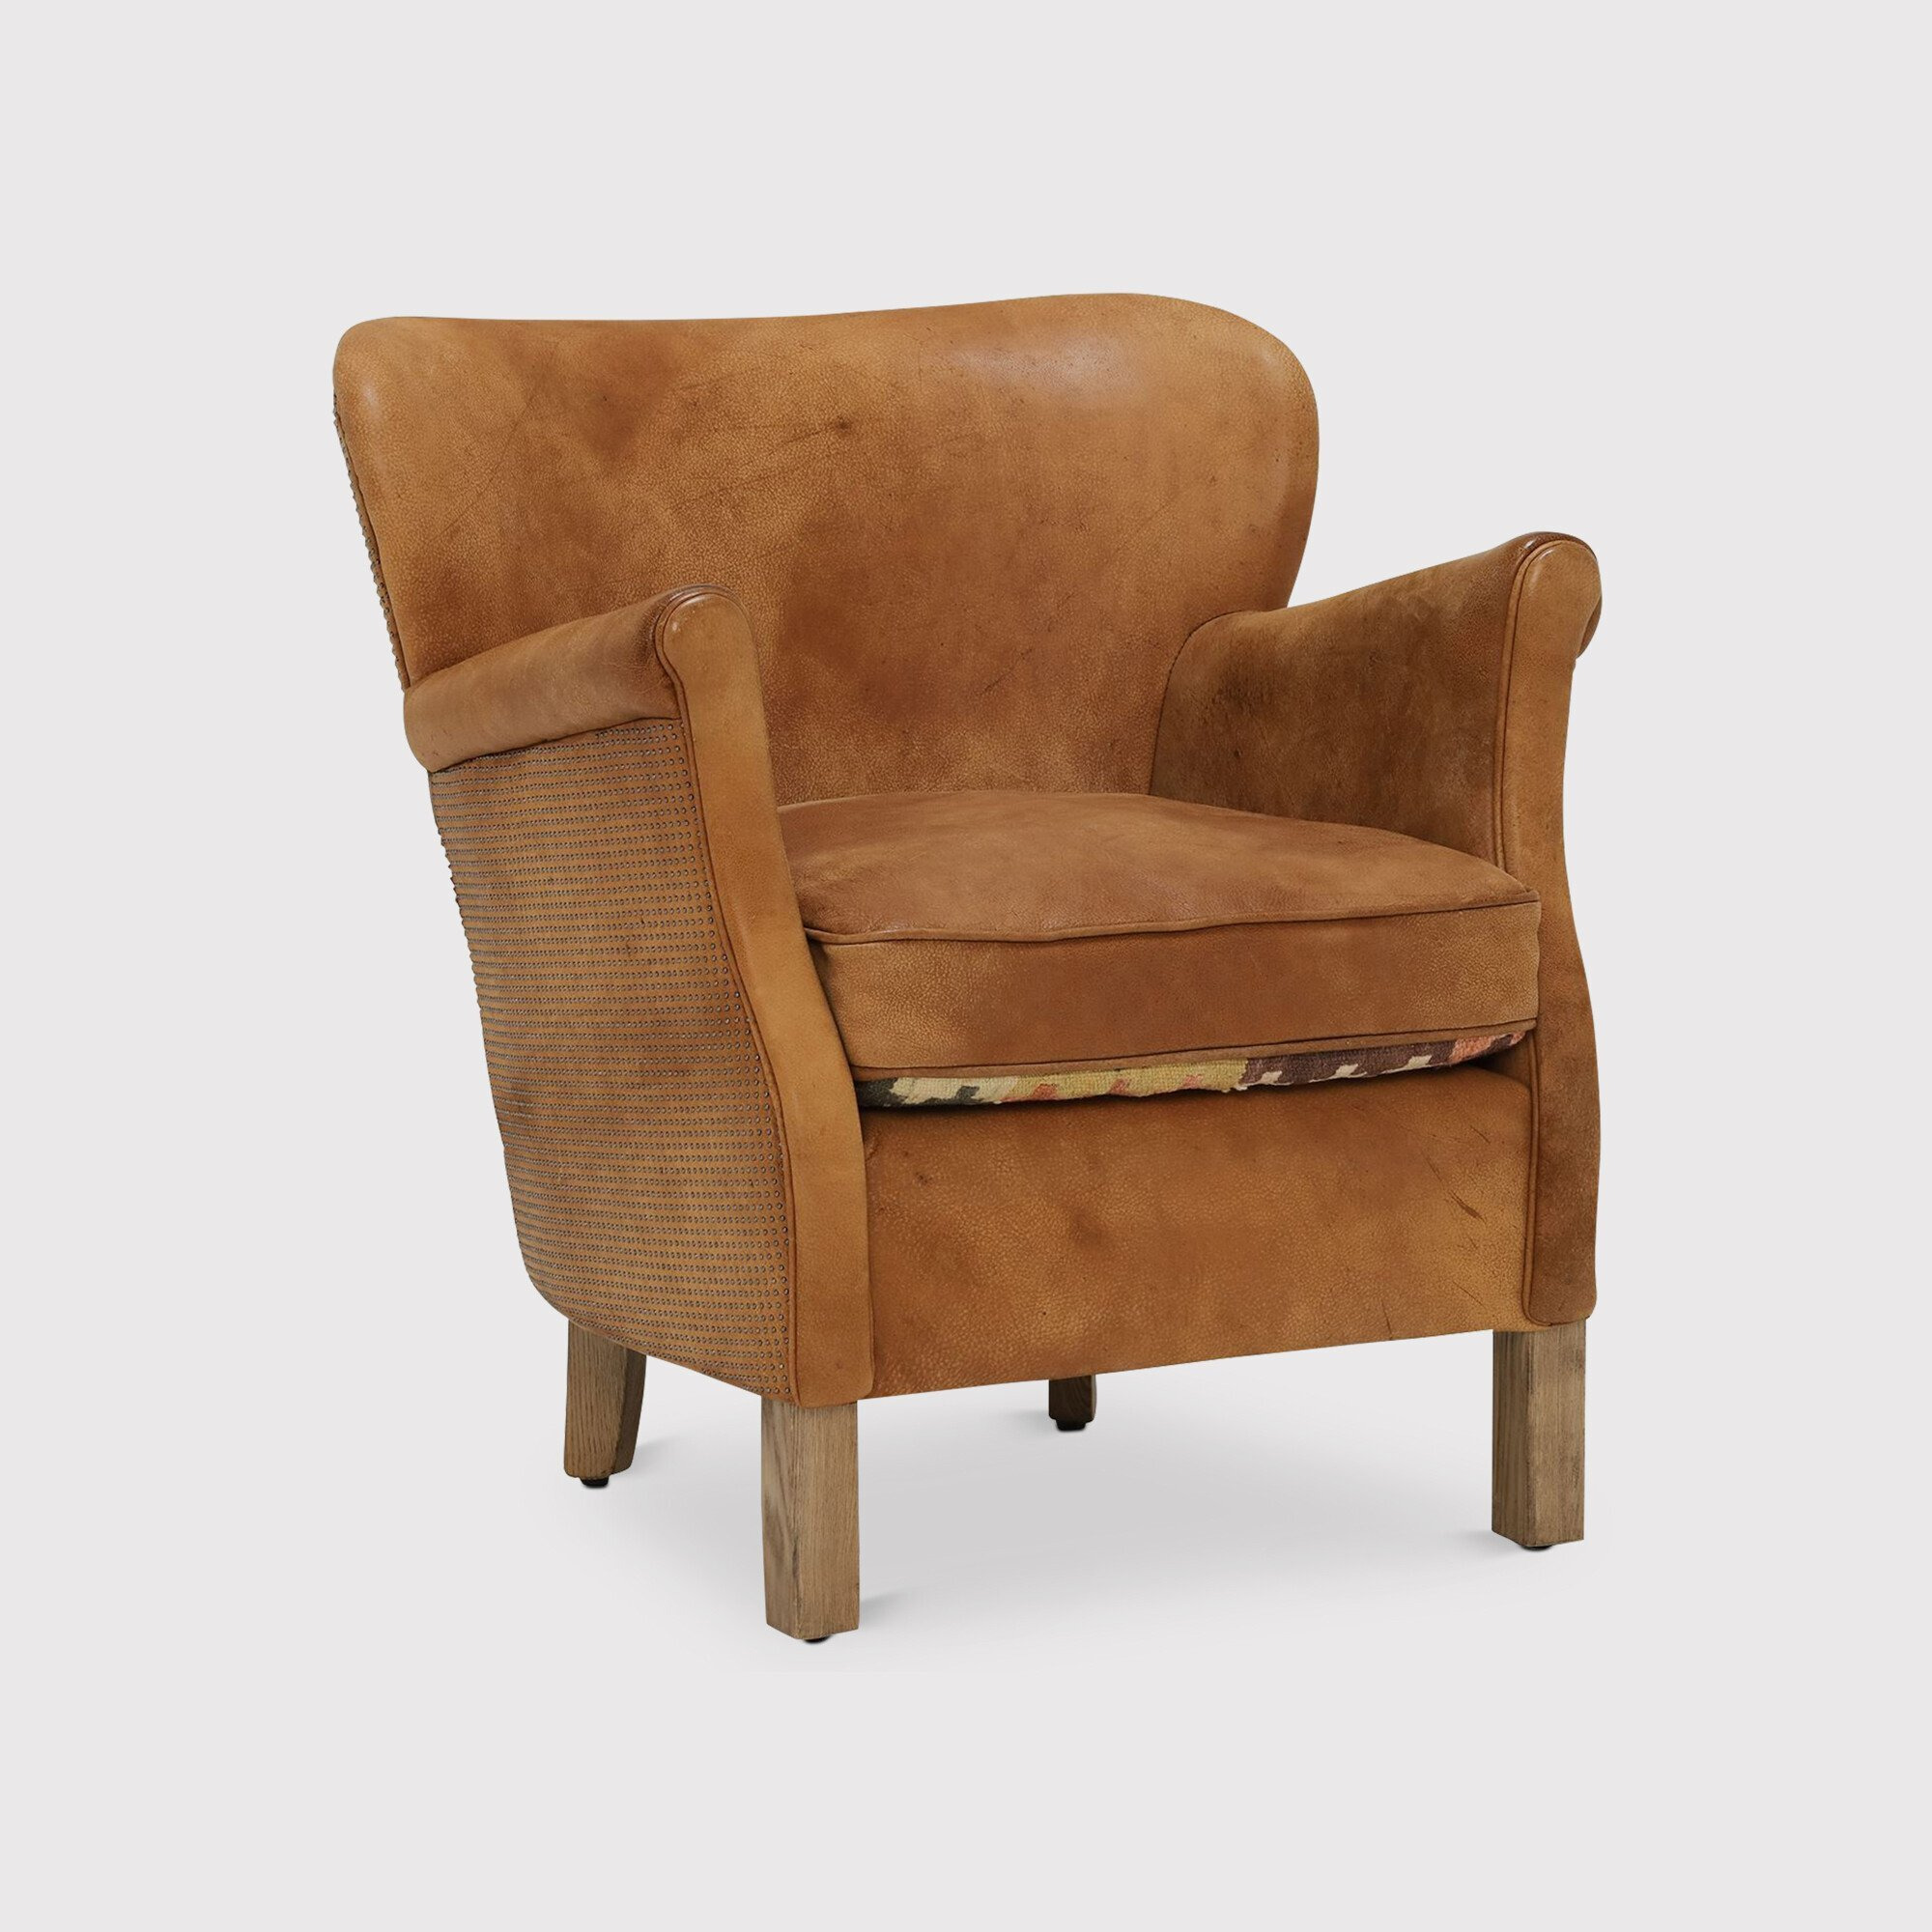 Timothy Oulton Stud Professor Armchair, Brown Leather - Barker & Stonehouse - image 1